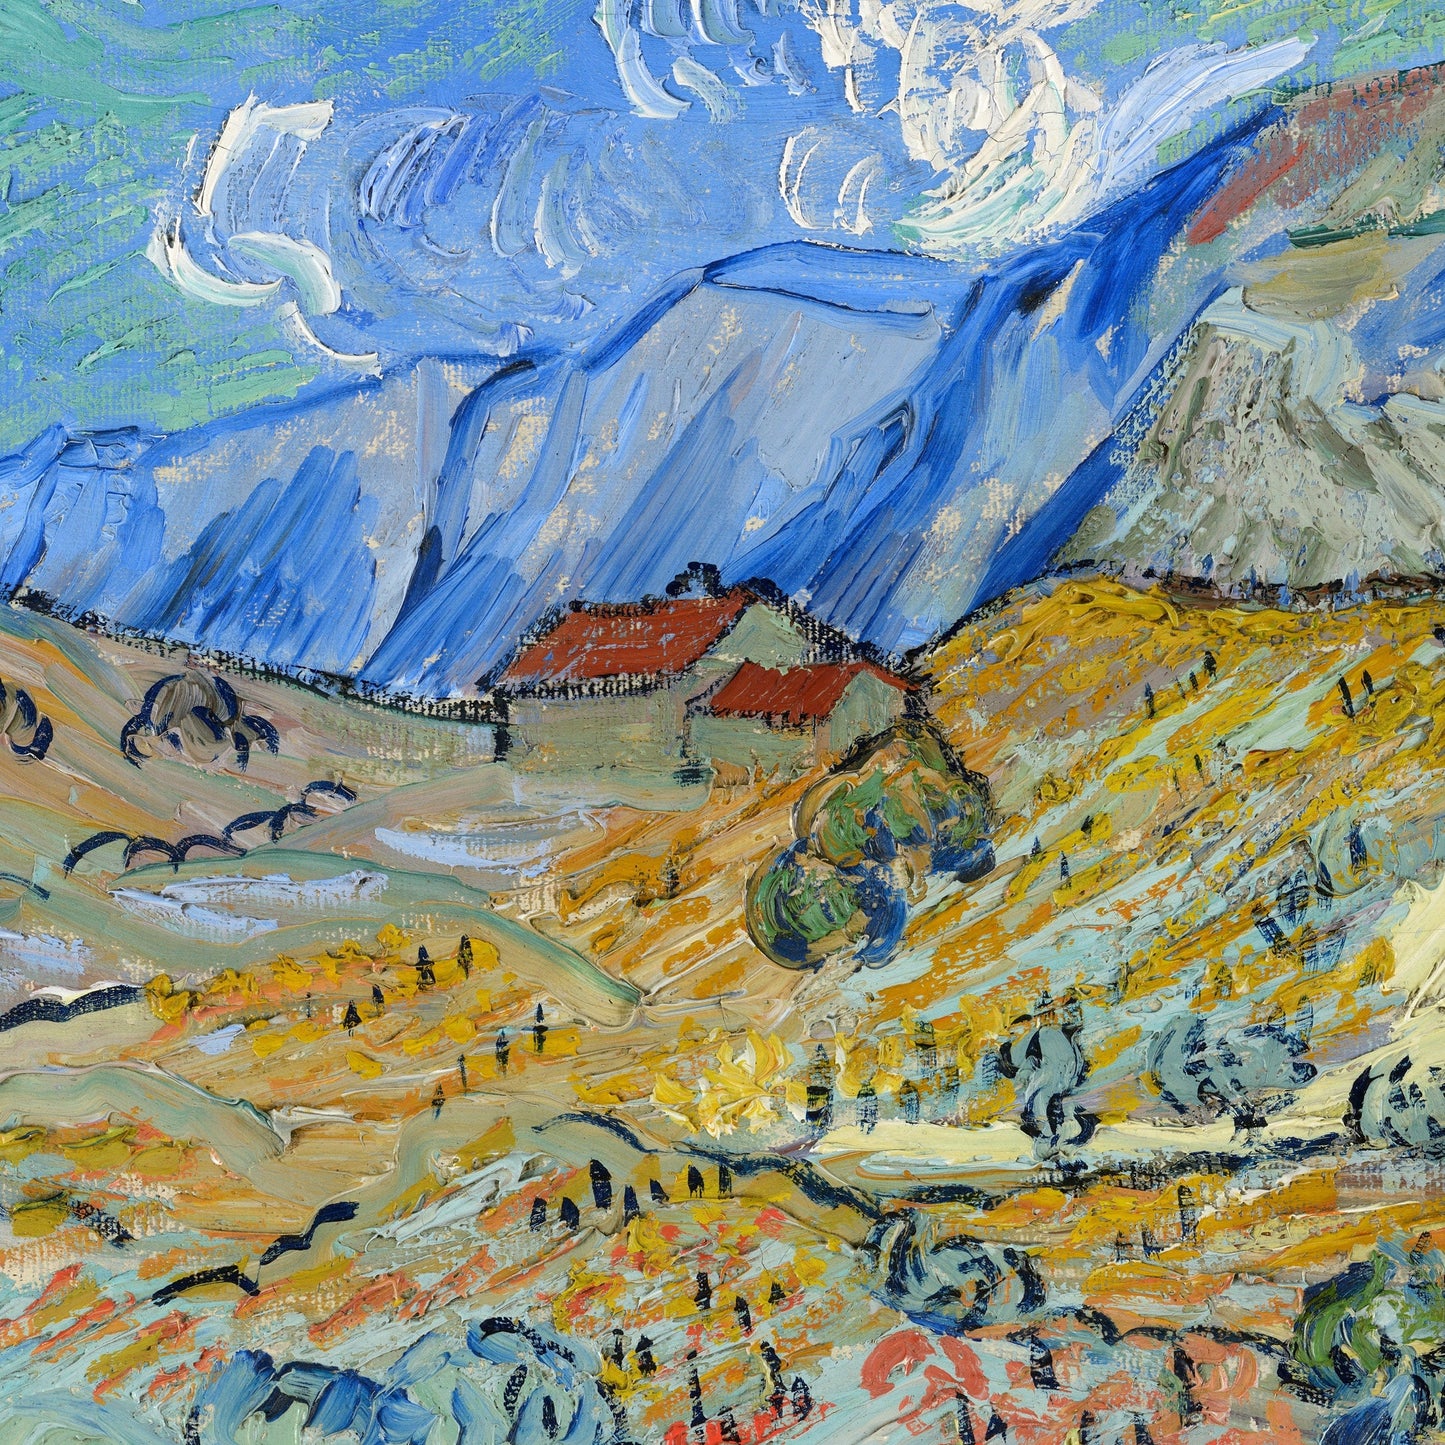 Landscape at Saint-Rémy by Vincent van Gogh, 3d Printed with texture and brush strokes looks like original oil-painting, code:376